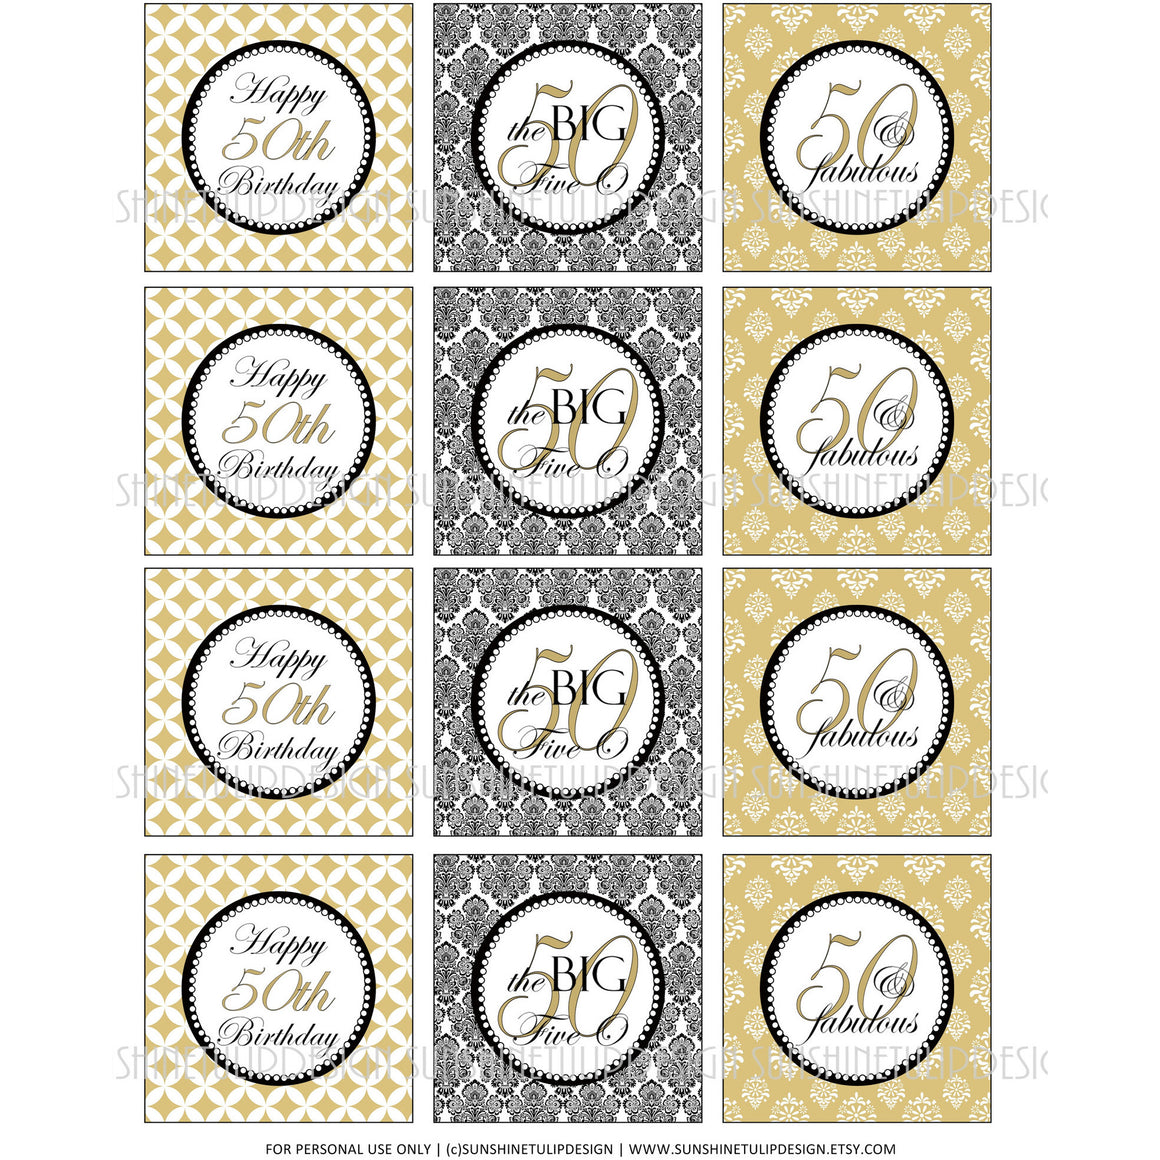 Printable 50th Birthday Gold & Black Cupcake Toppers, Sticker Labels & Party Favor Tags - Sunshinetulipdesign